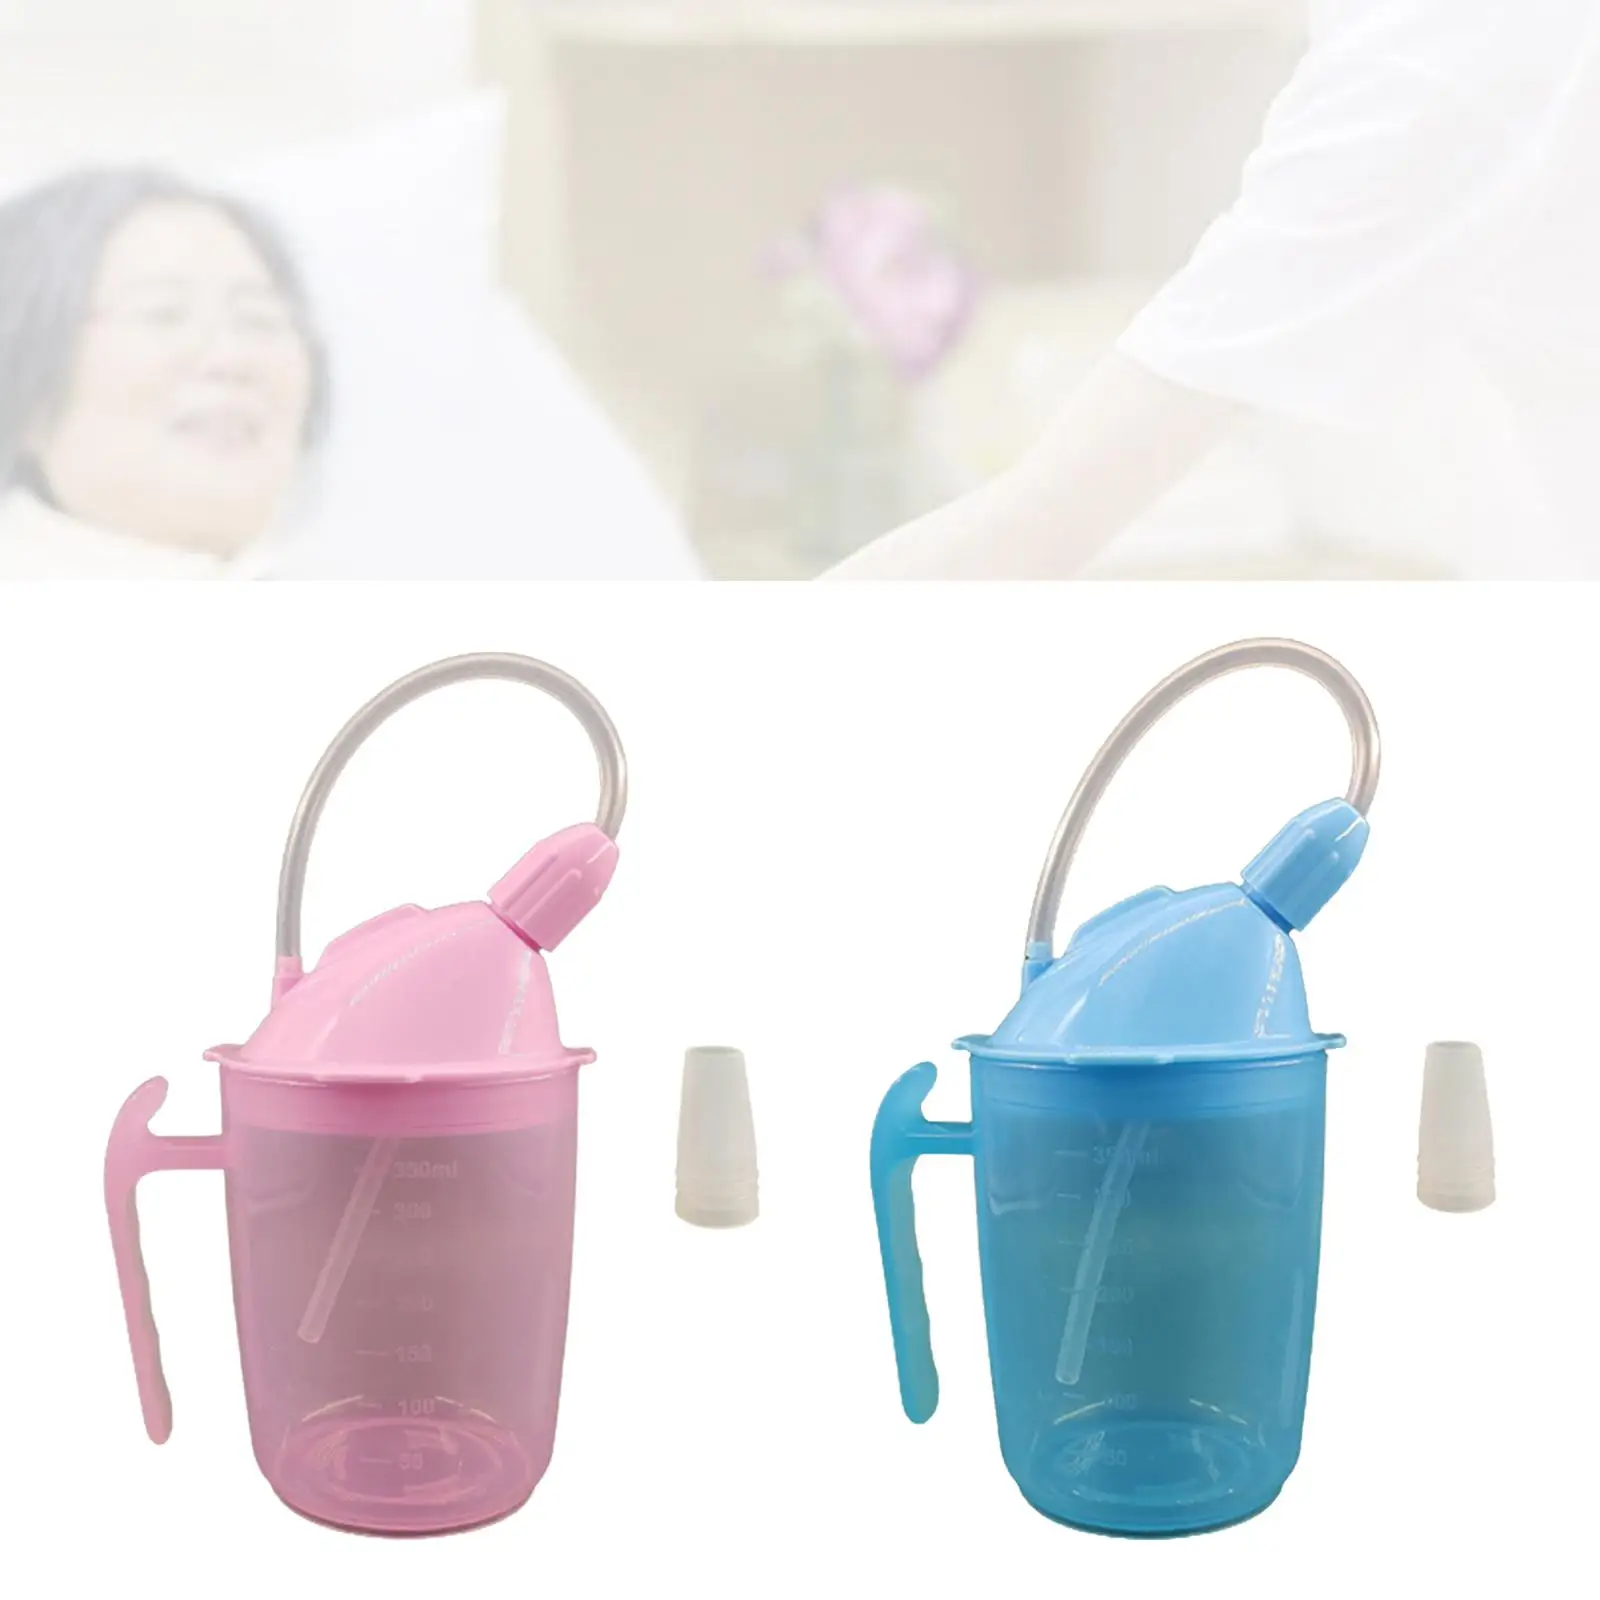 Elderly Nursing Cup, Drinking Cup with Straw for Disabled Patient Maternity Drink Water Porridge Soup, Drinking Aids